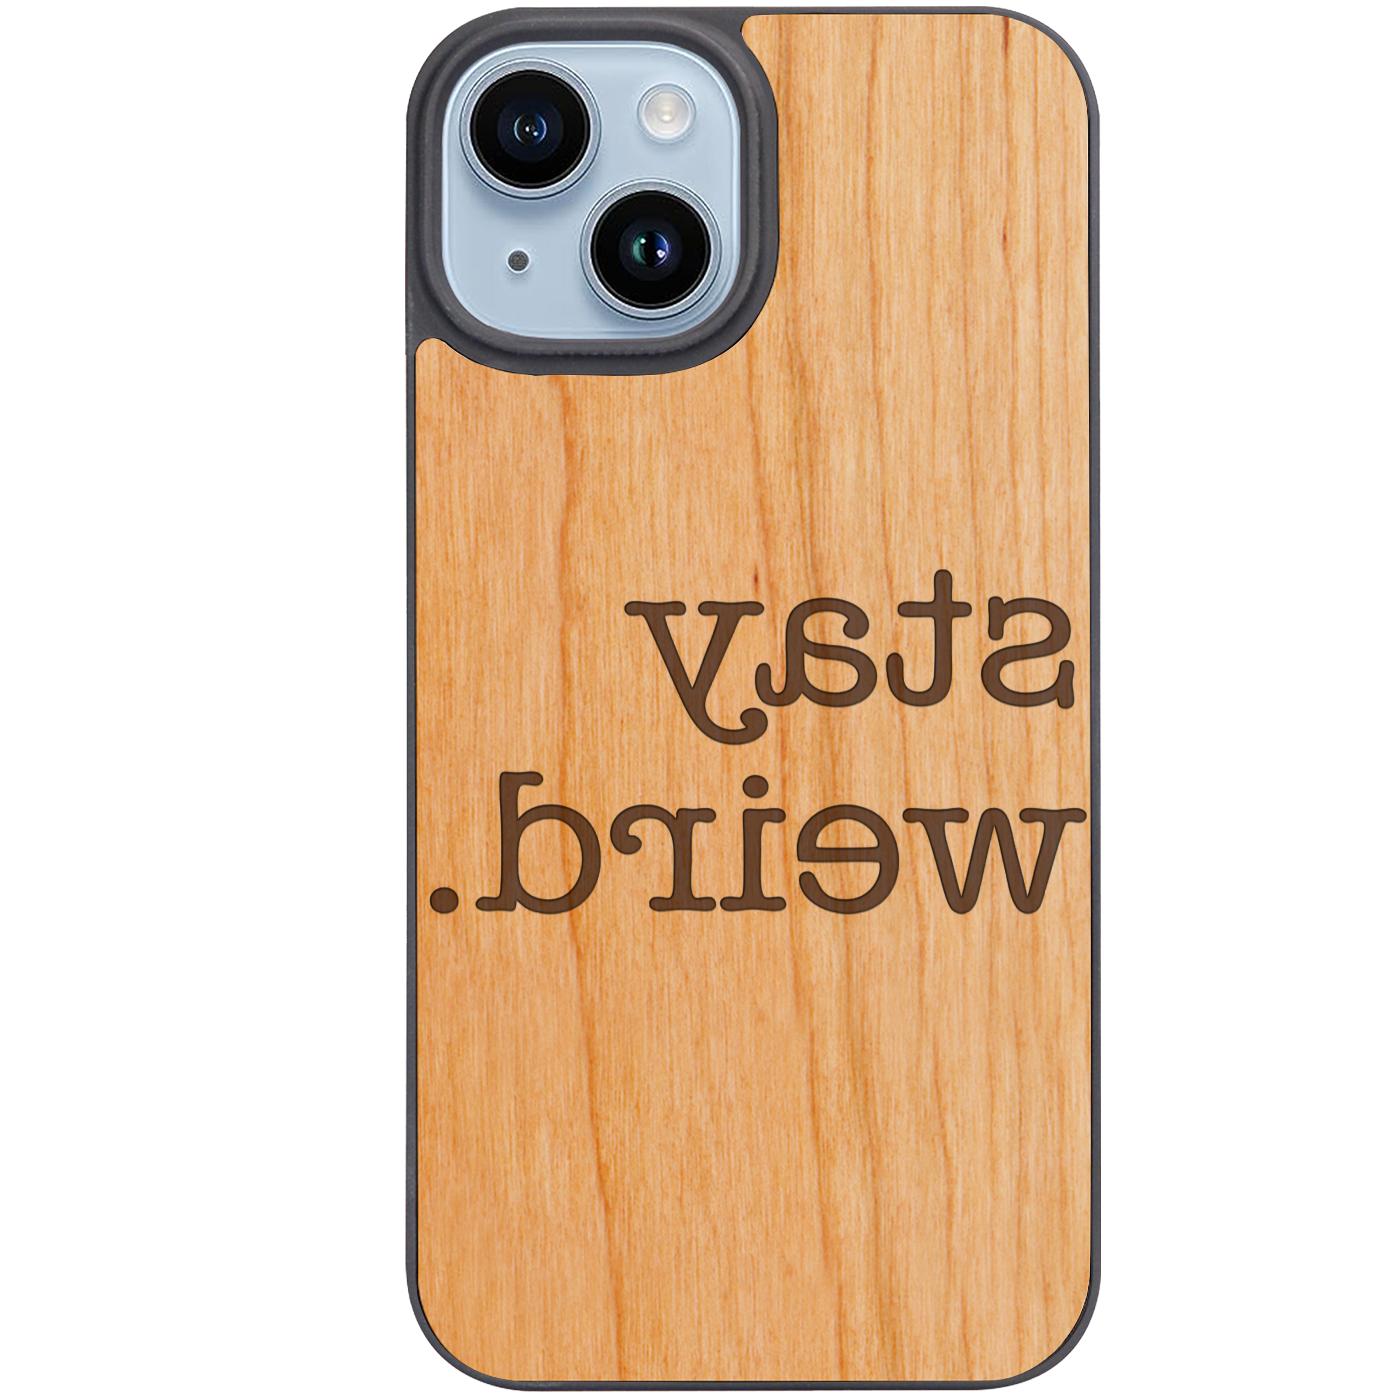 Stay Weird - Engraved Phone Case